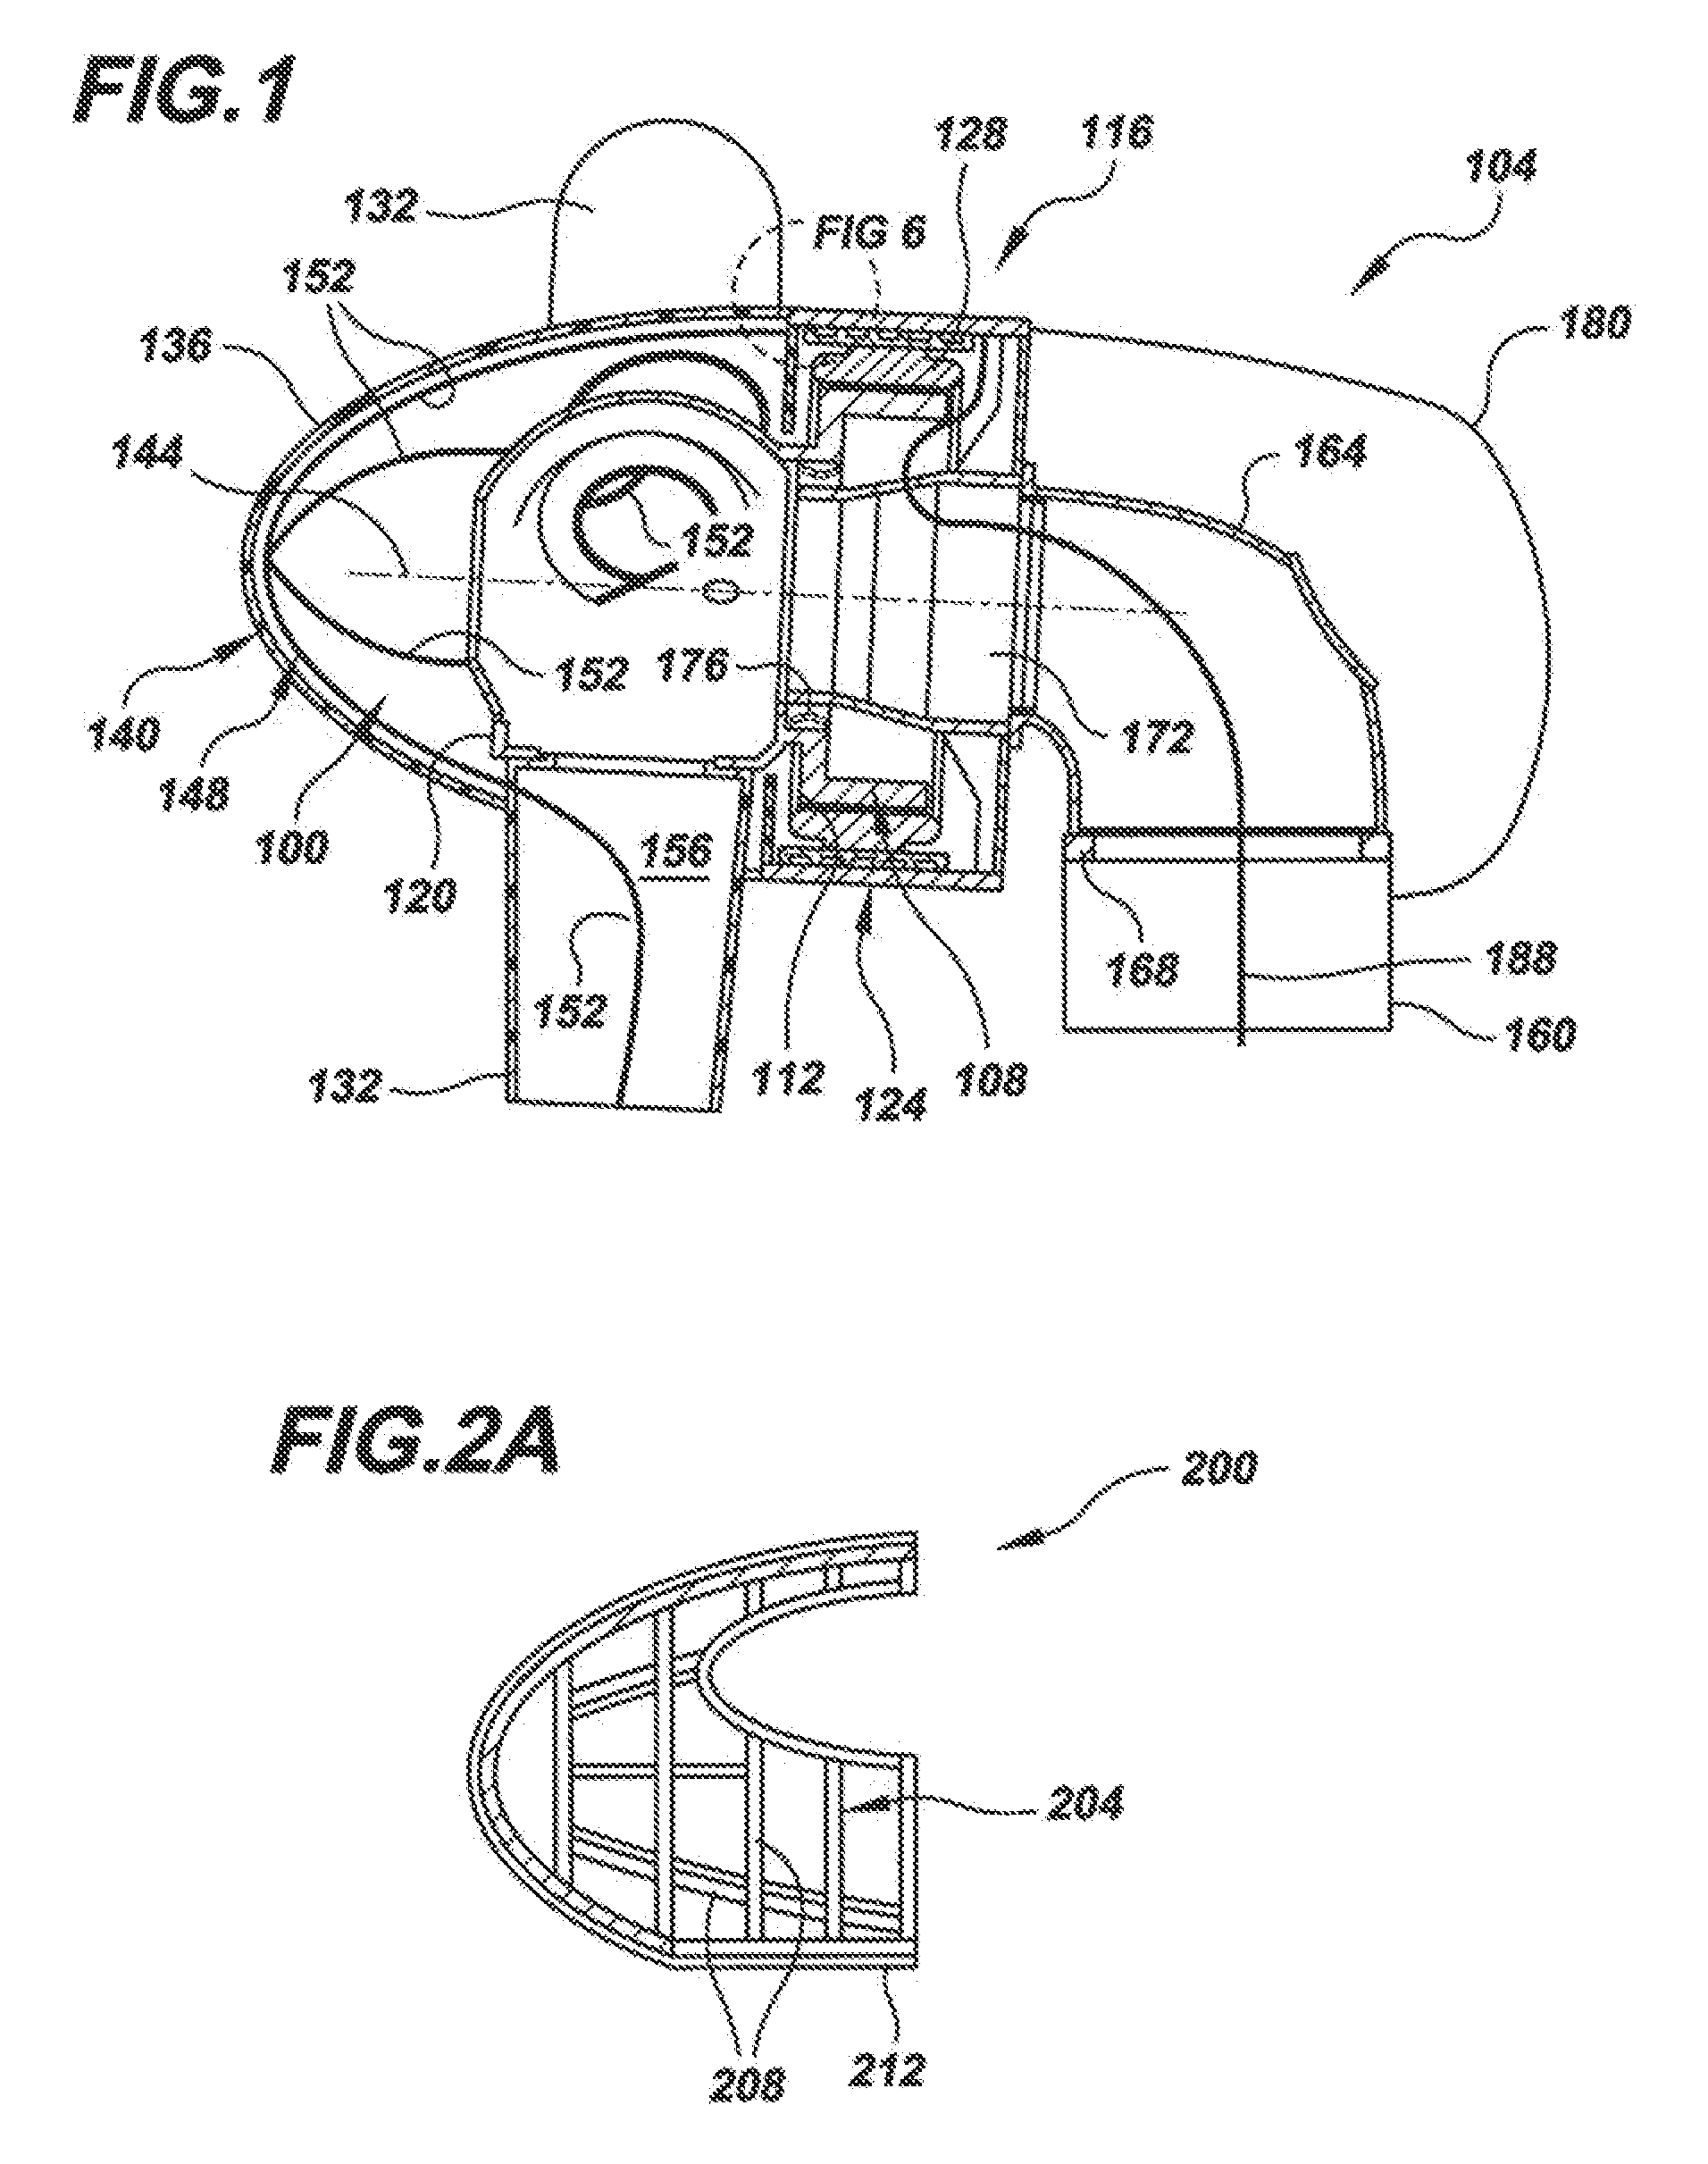 Lightning protection system for a wind turbine